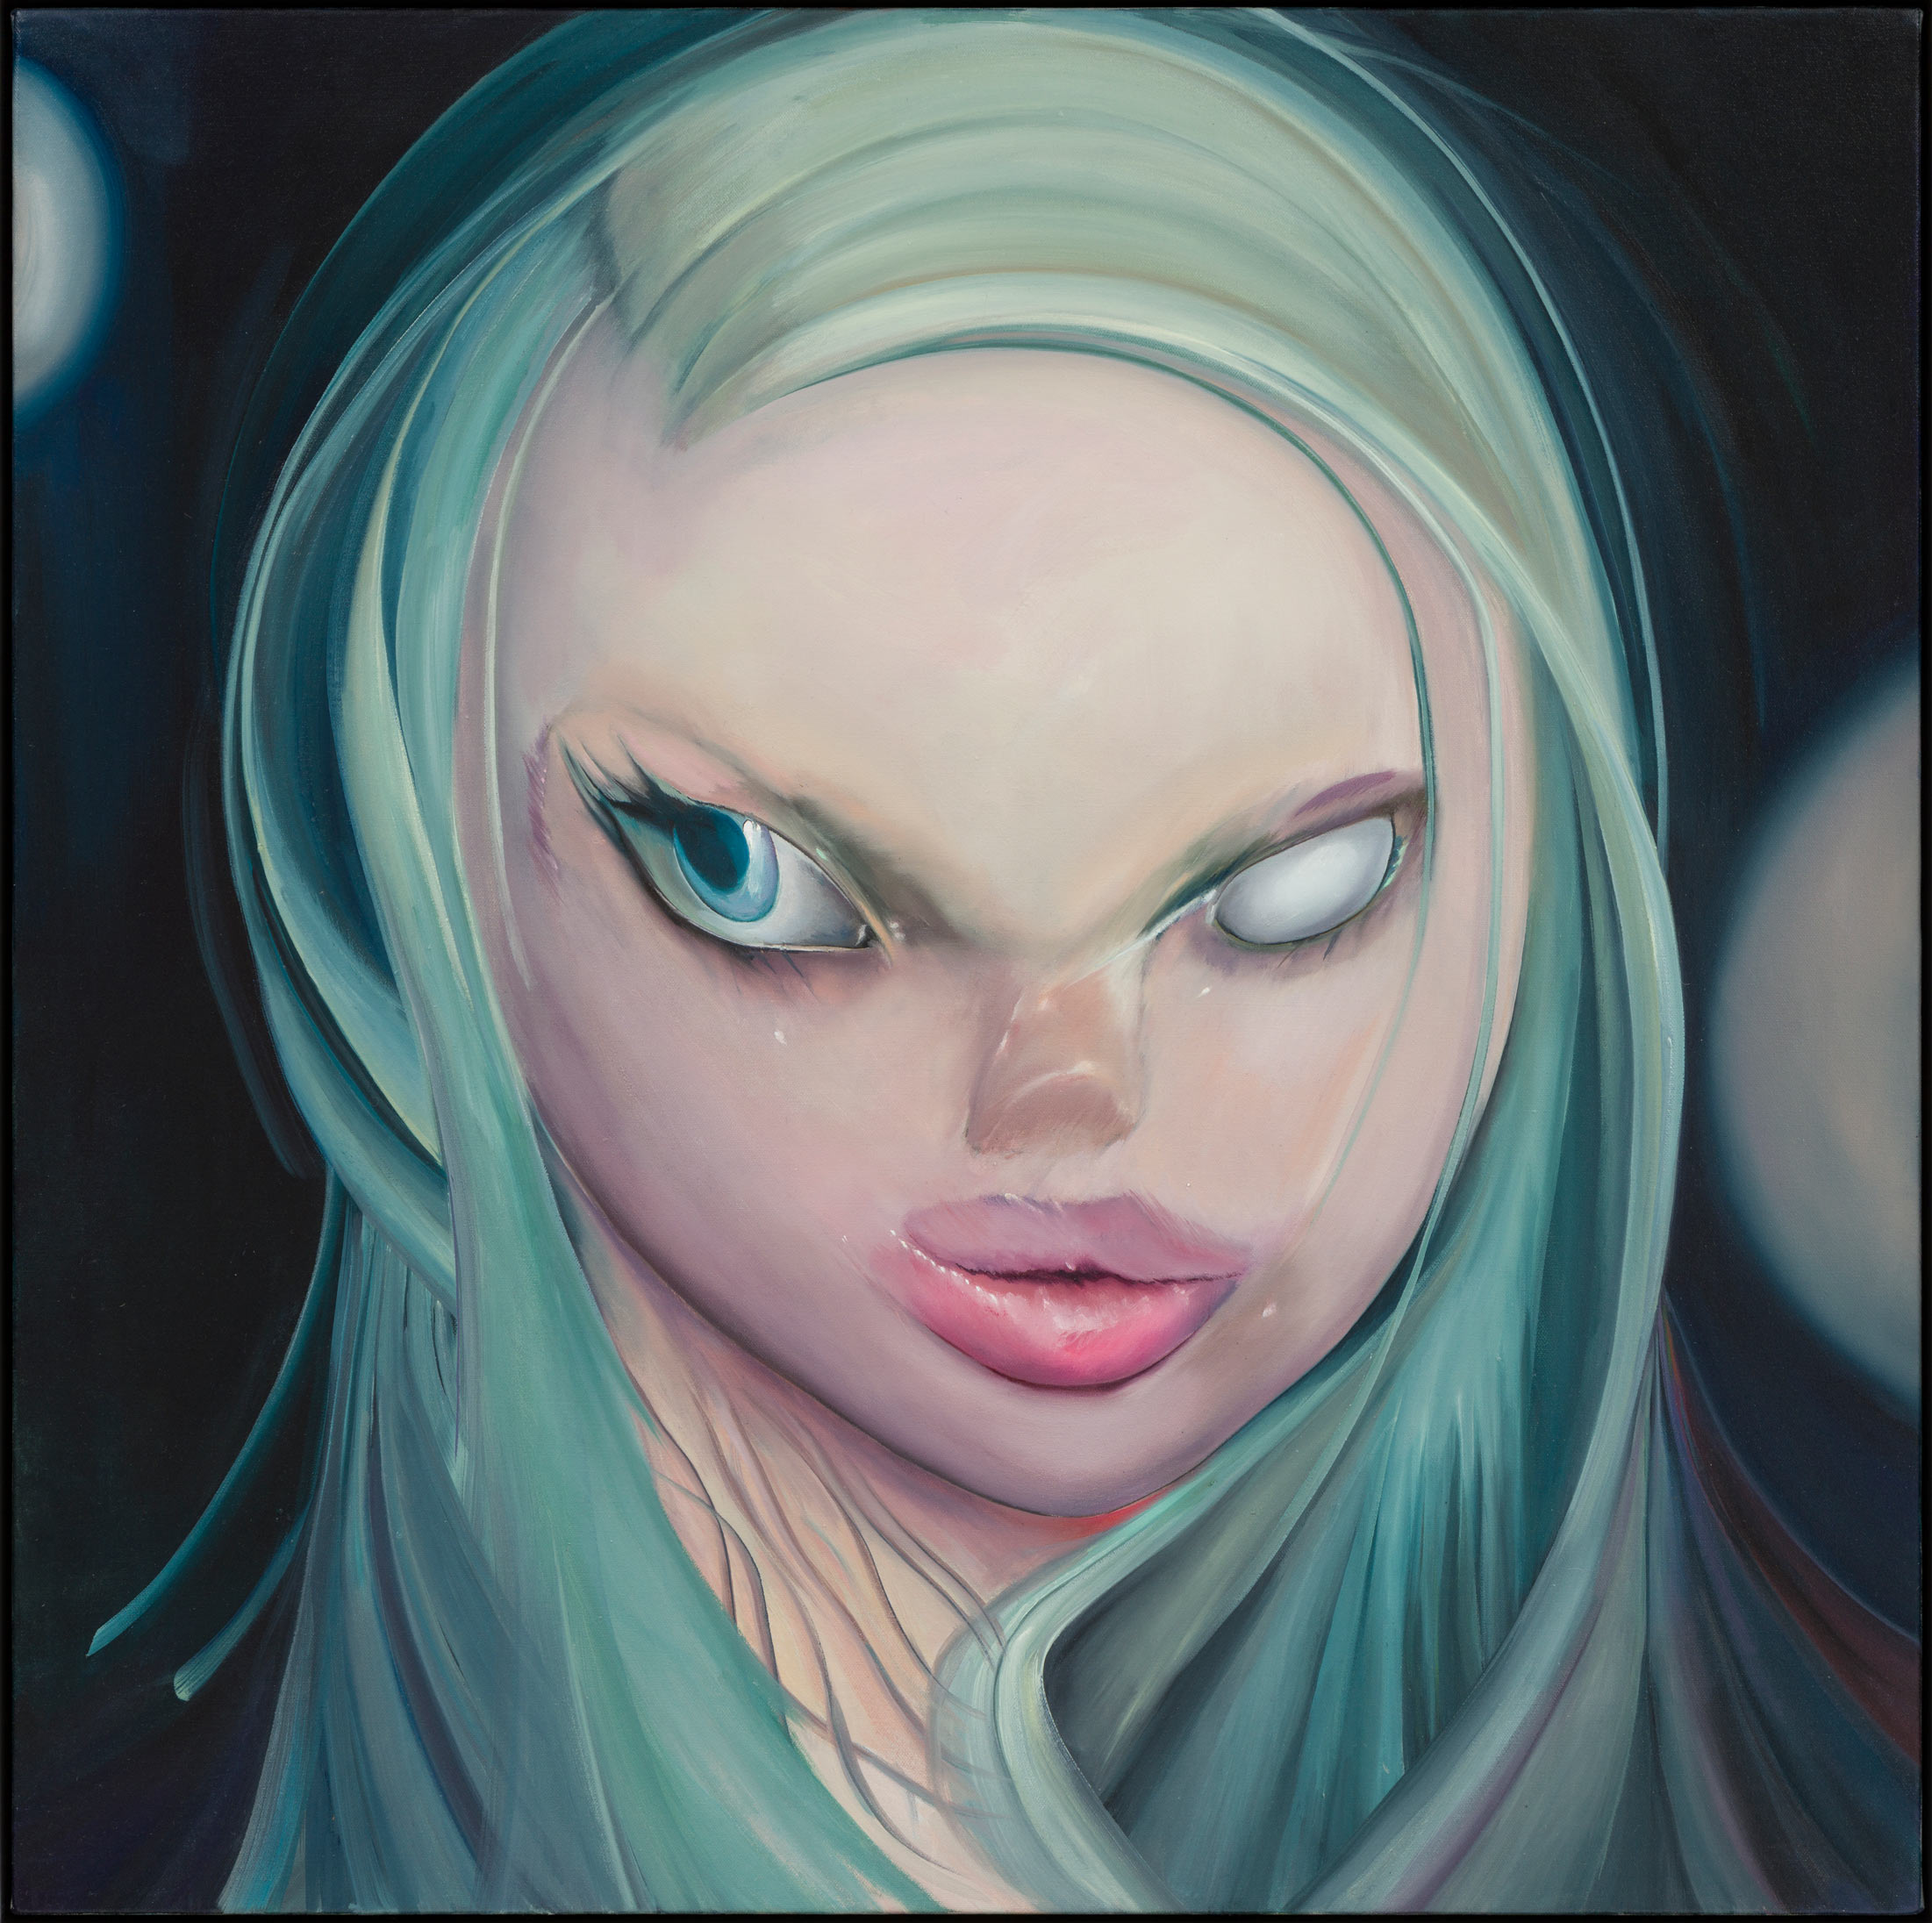 An oil painting of a portrait of a Caucasian girl with teal coloured hair which curves around their face and is shoulder length. They are missing one eye and the one that is showing is blue. They have pink plump lips and are looking to the left.